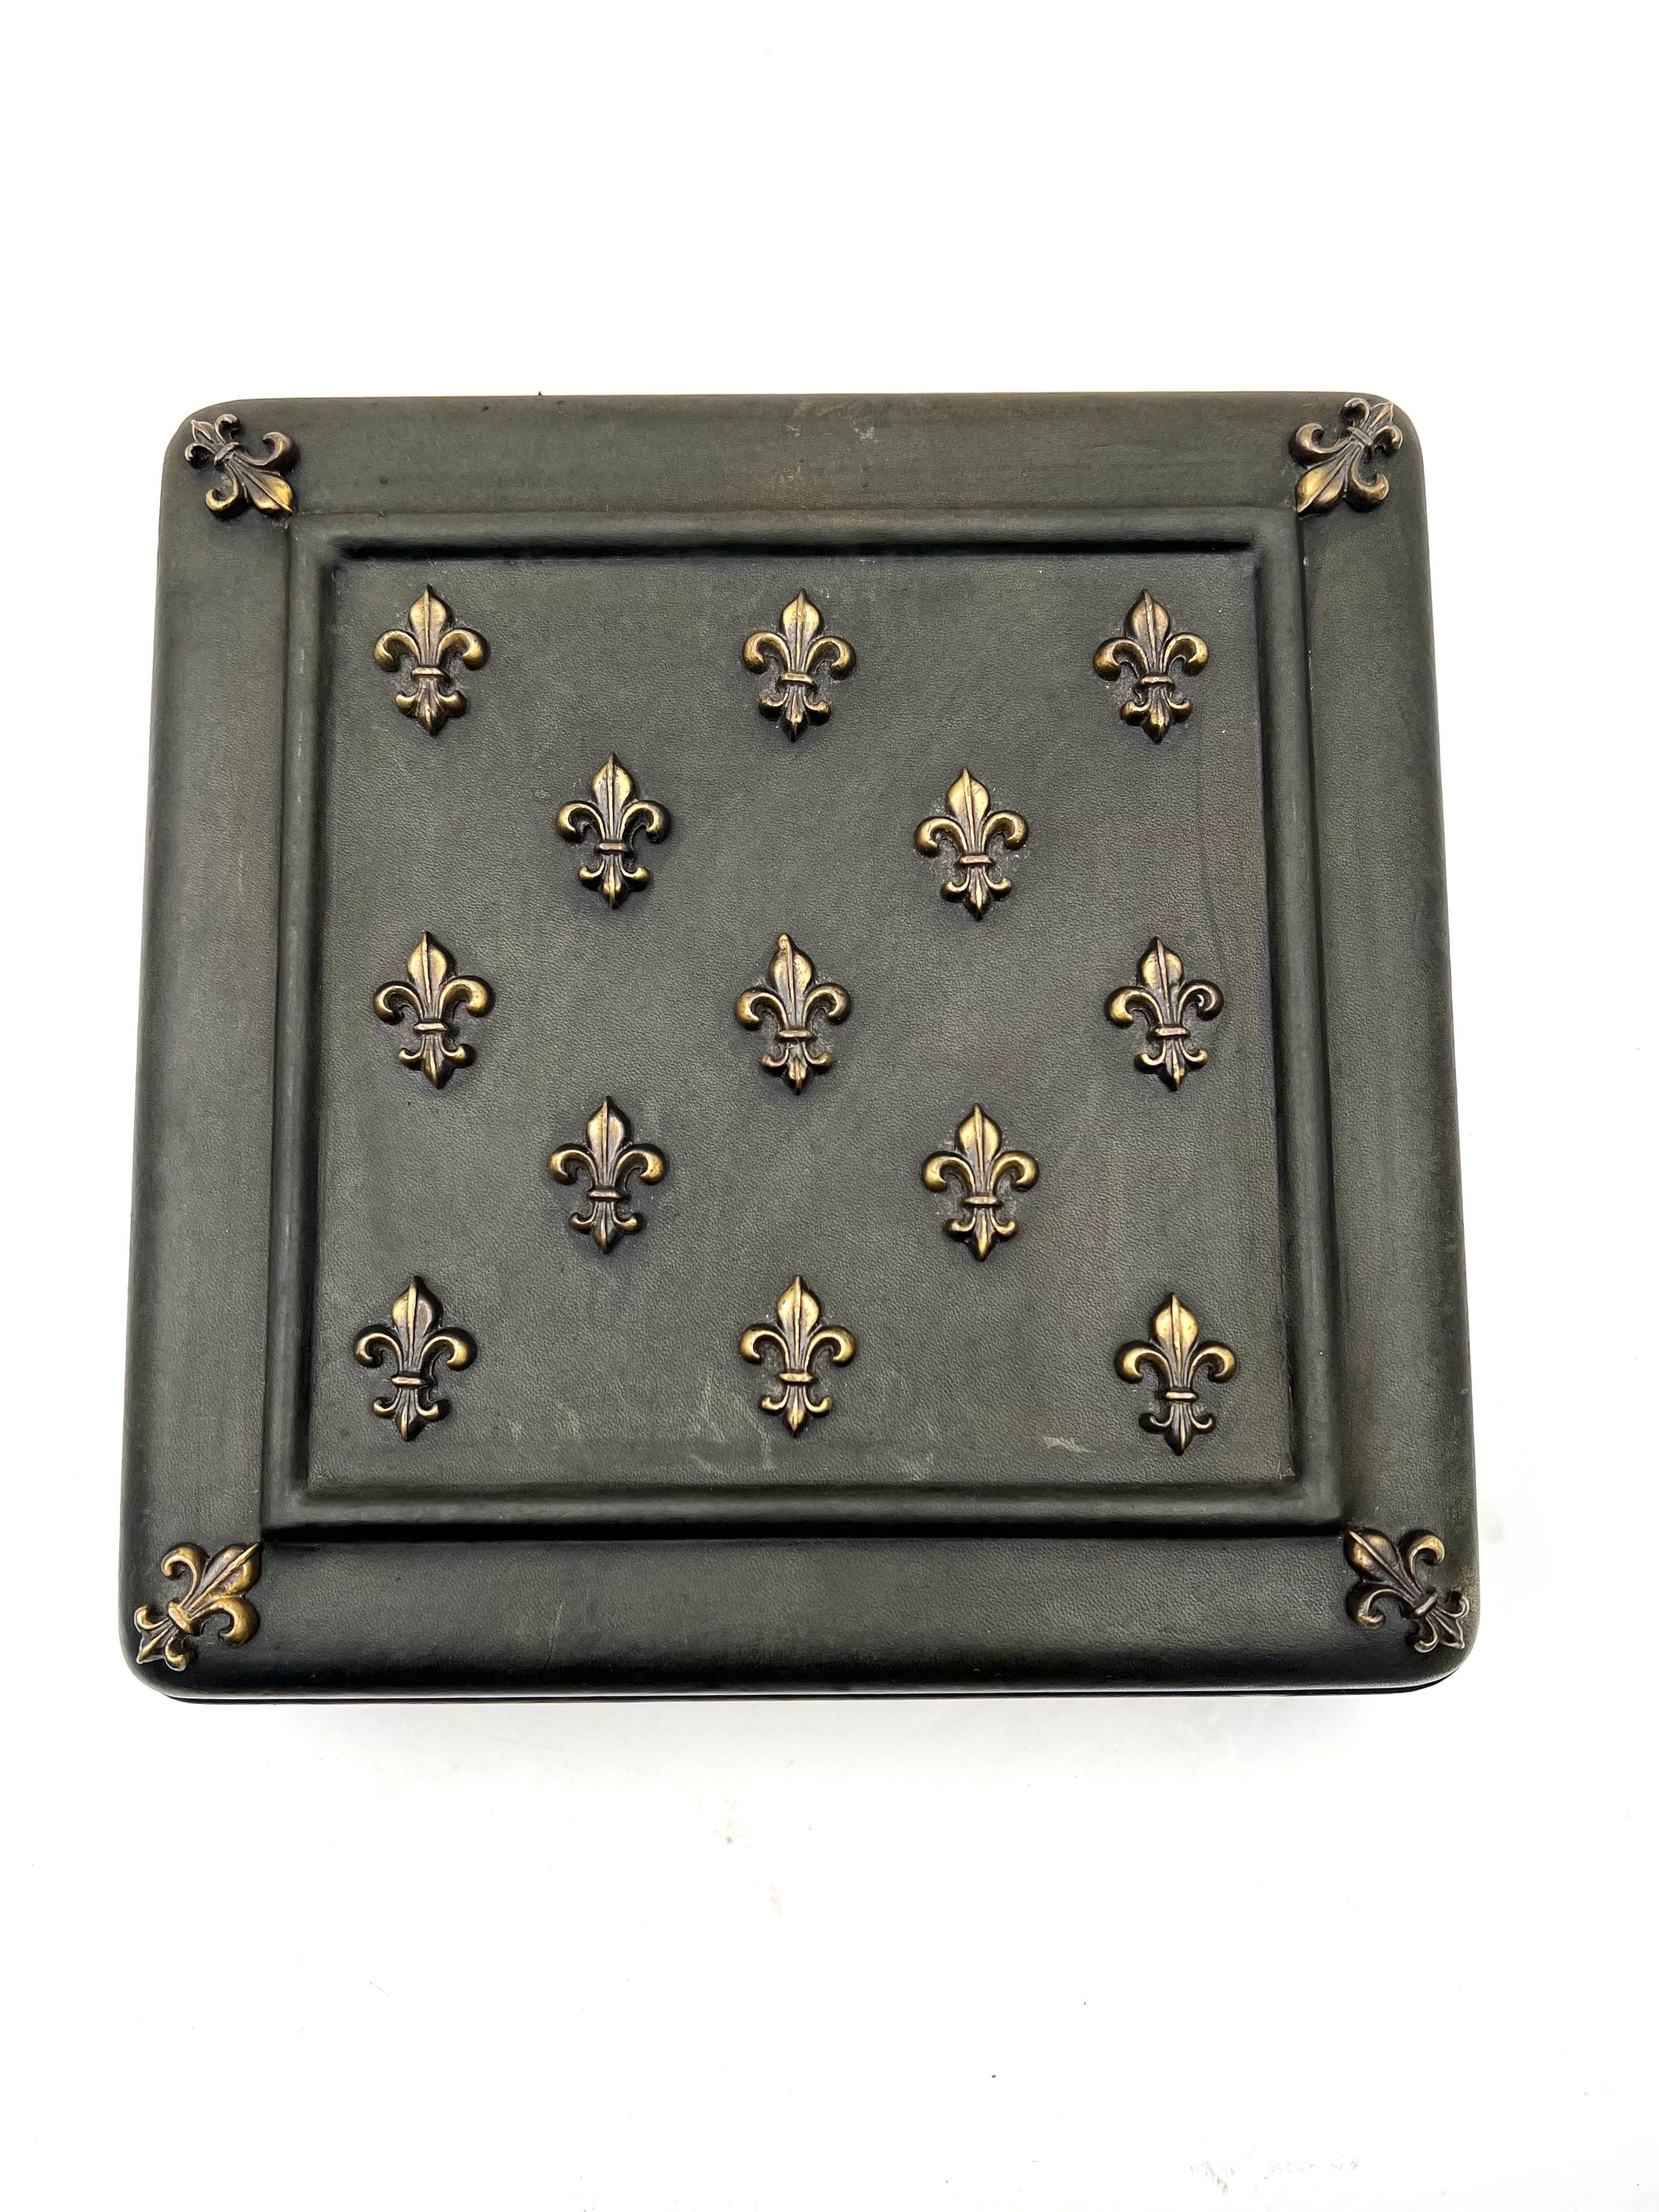 Beautiful elegant wrapped leather box with Fleur De Lis motif, circa 1960's, in olive green leather with gold accents nice and clean condition with cloth interior.